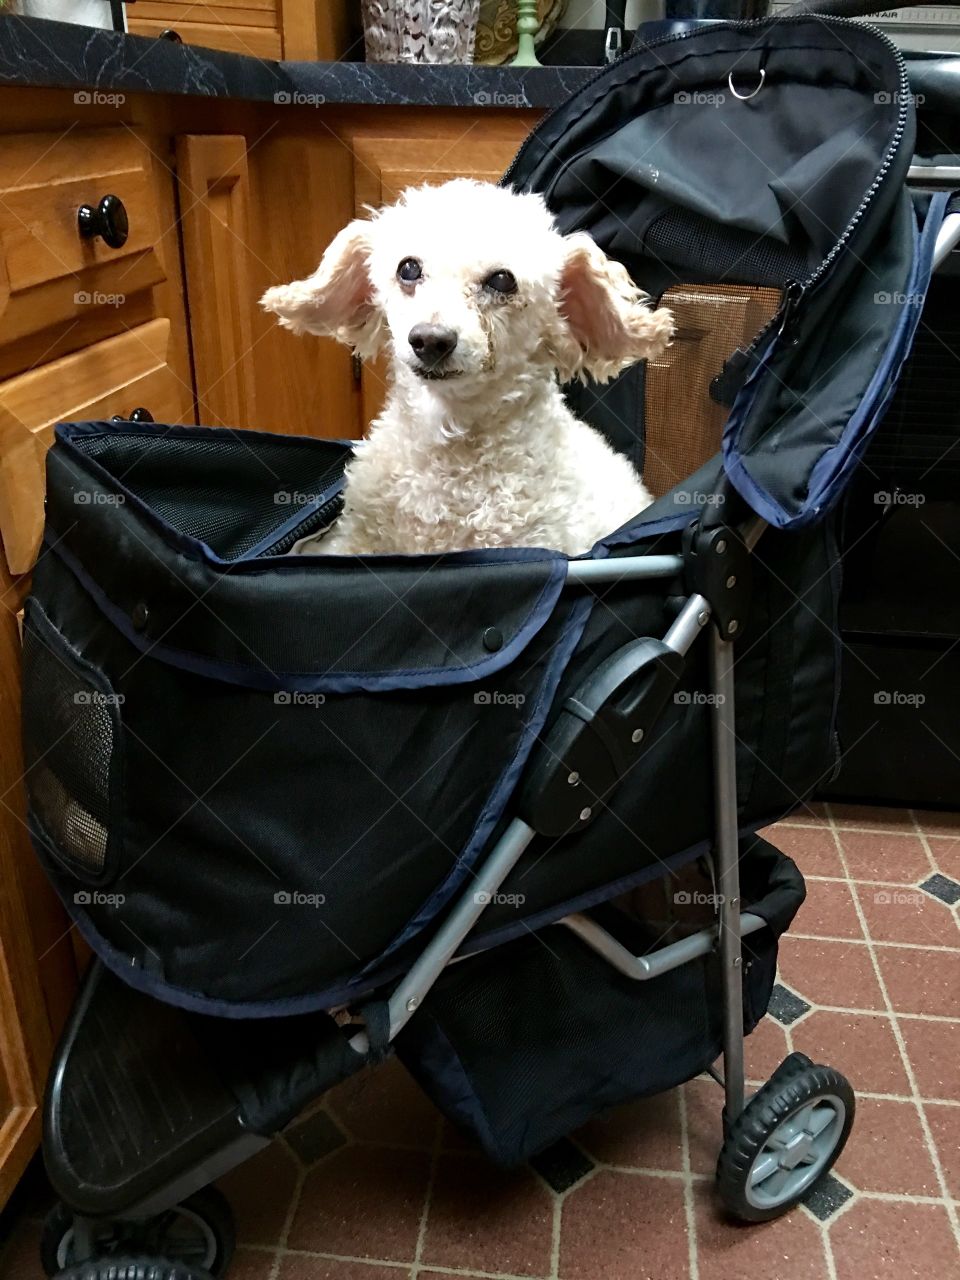 Carriage for Animal Safety-Poodle Dog

This is how my best friend of 16 yrs, my Poodle, keeps me company when I'm doing dishes. That way he's by my side when he follows me to the kitchen. He has a bad back & anything I can do to help him, I try to do!